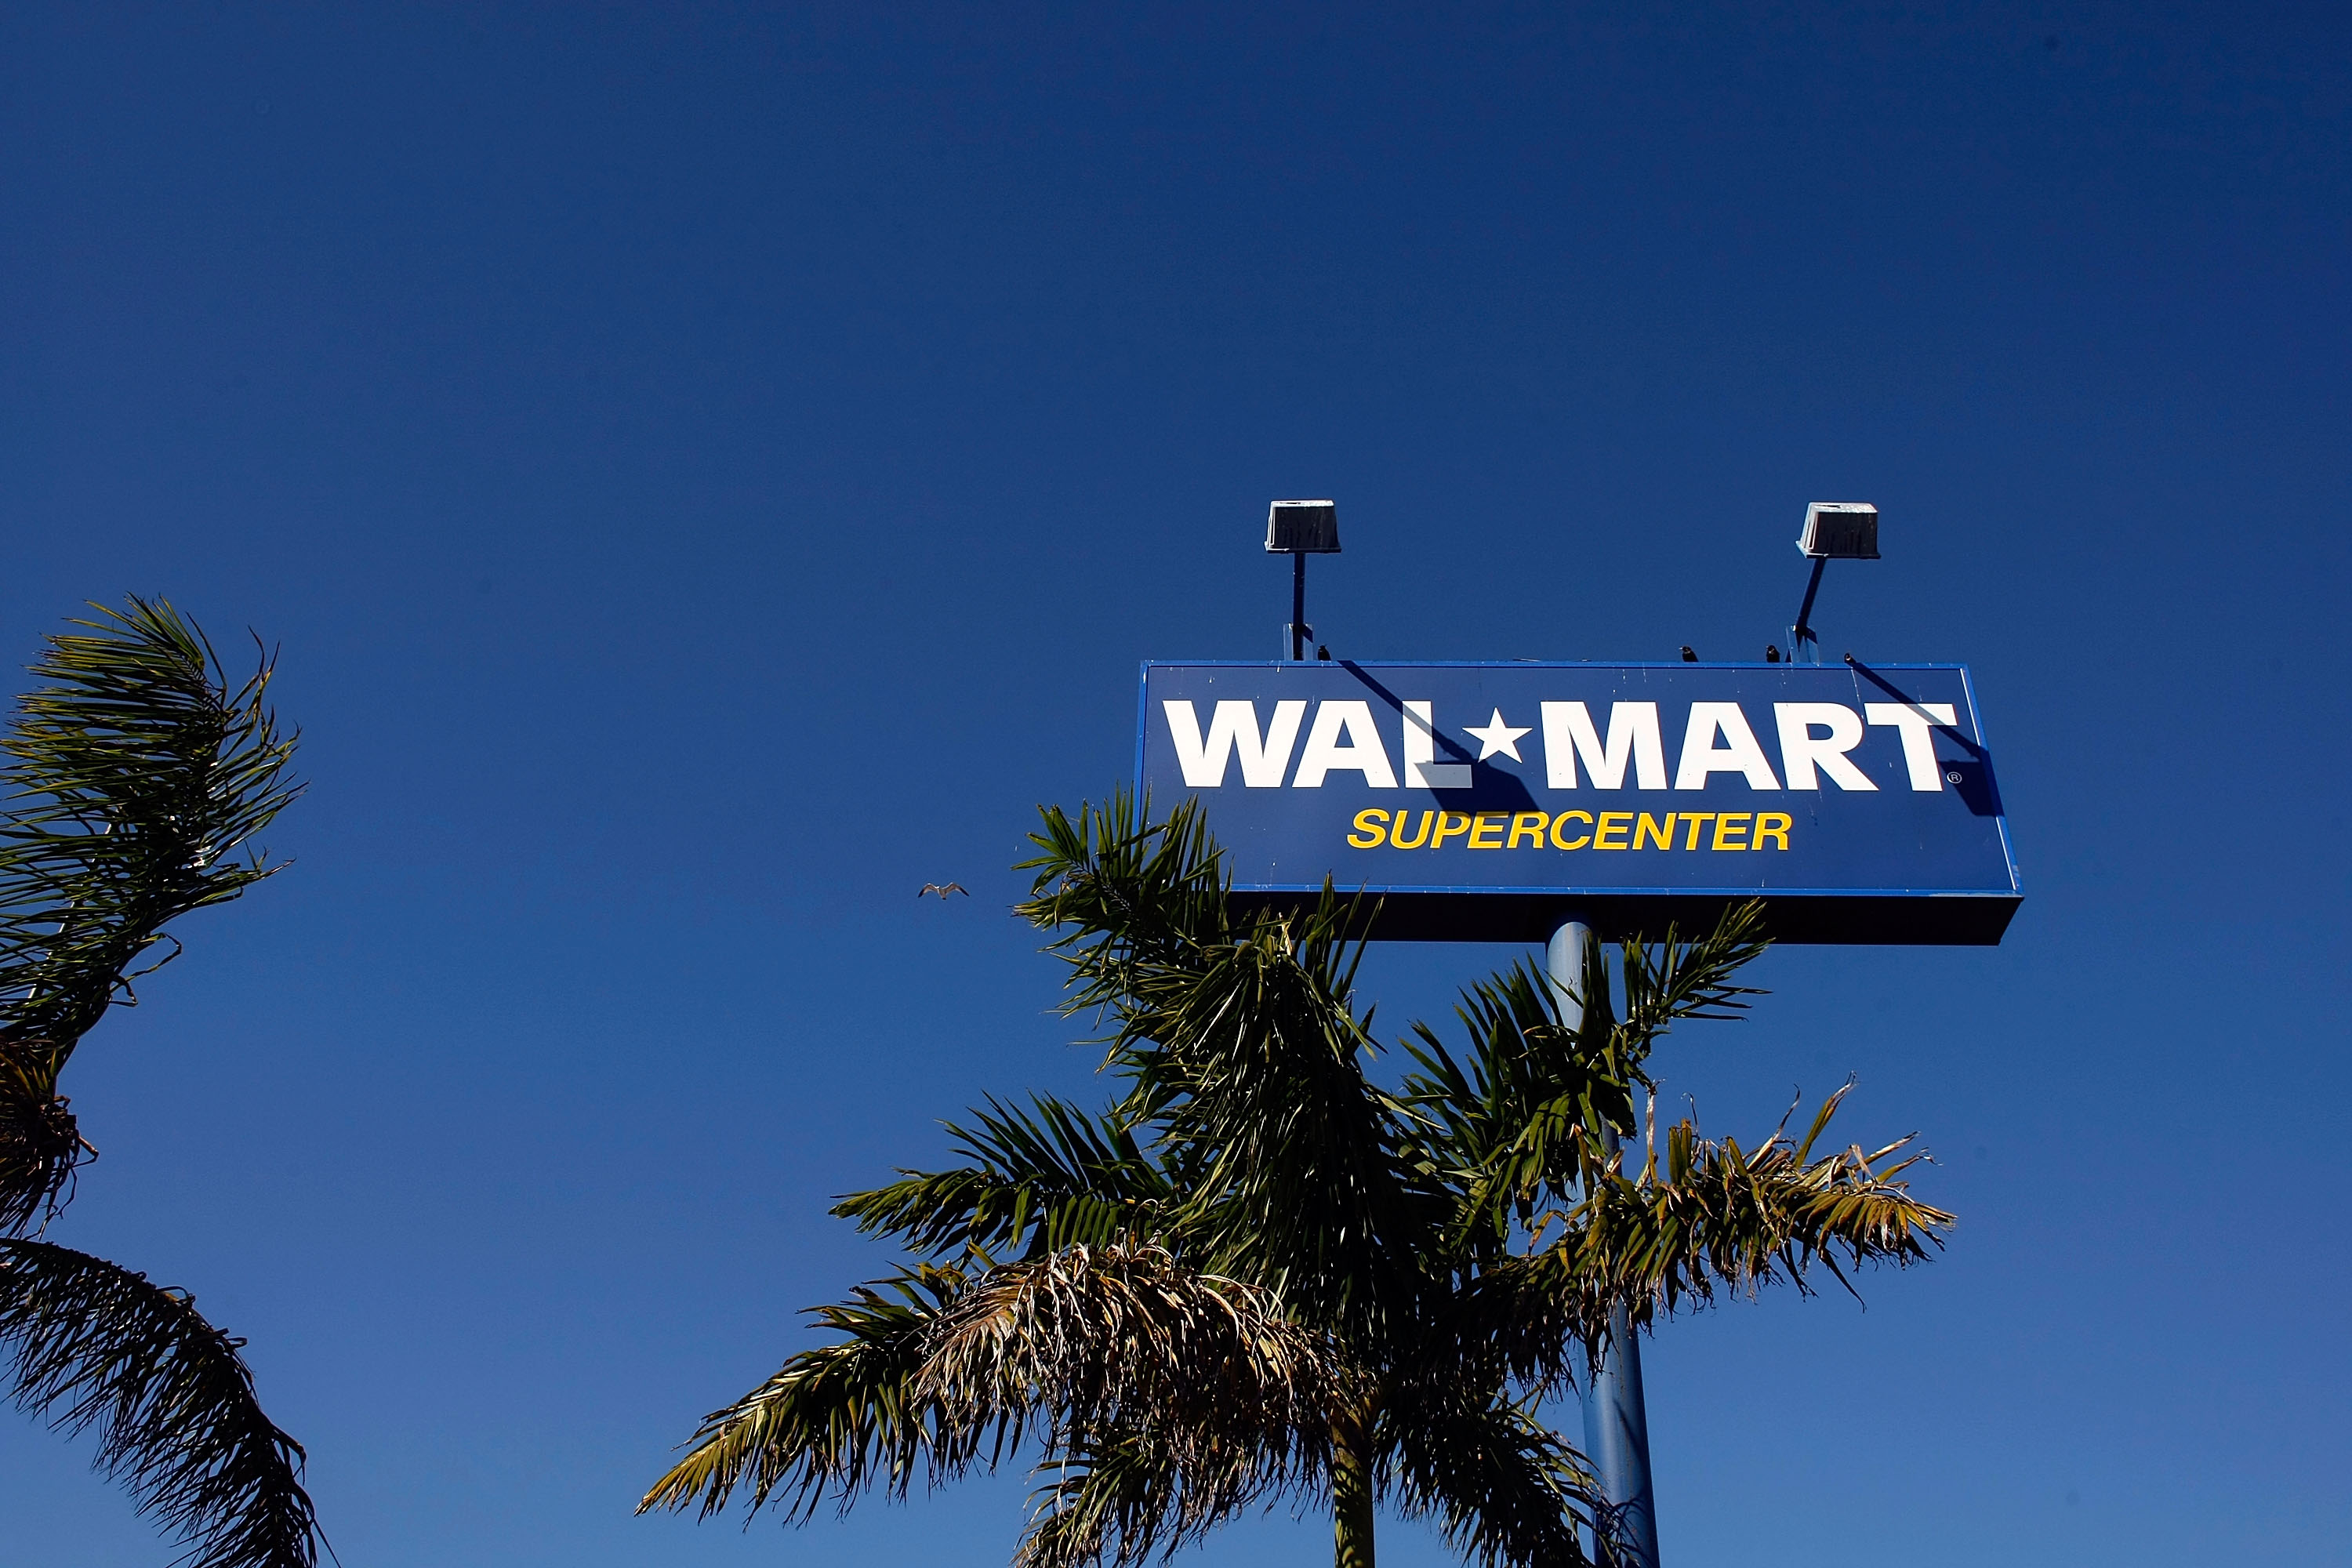 A Walmart store in Florida